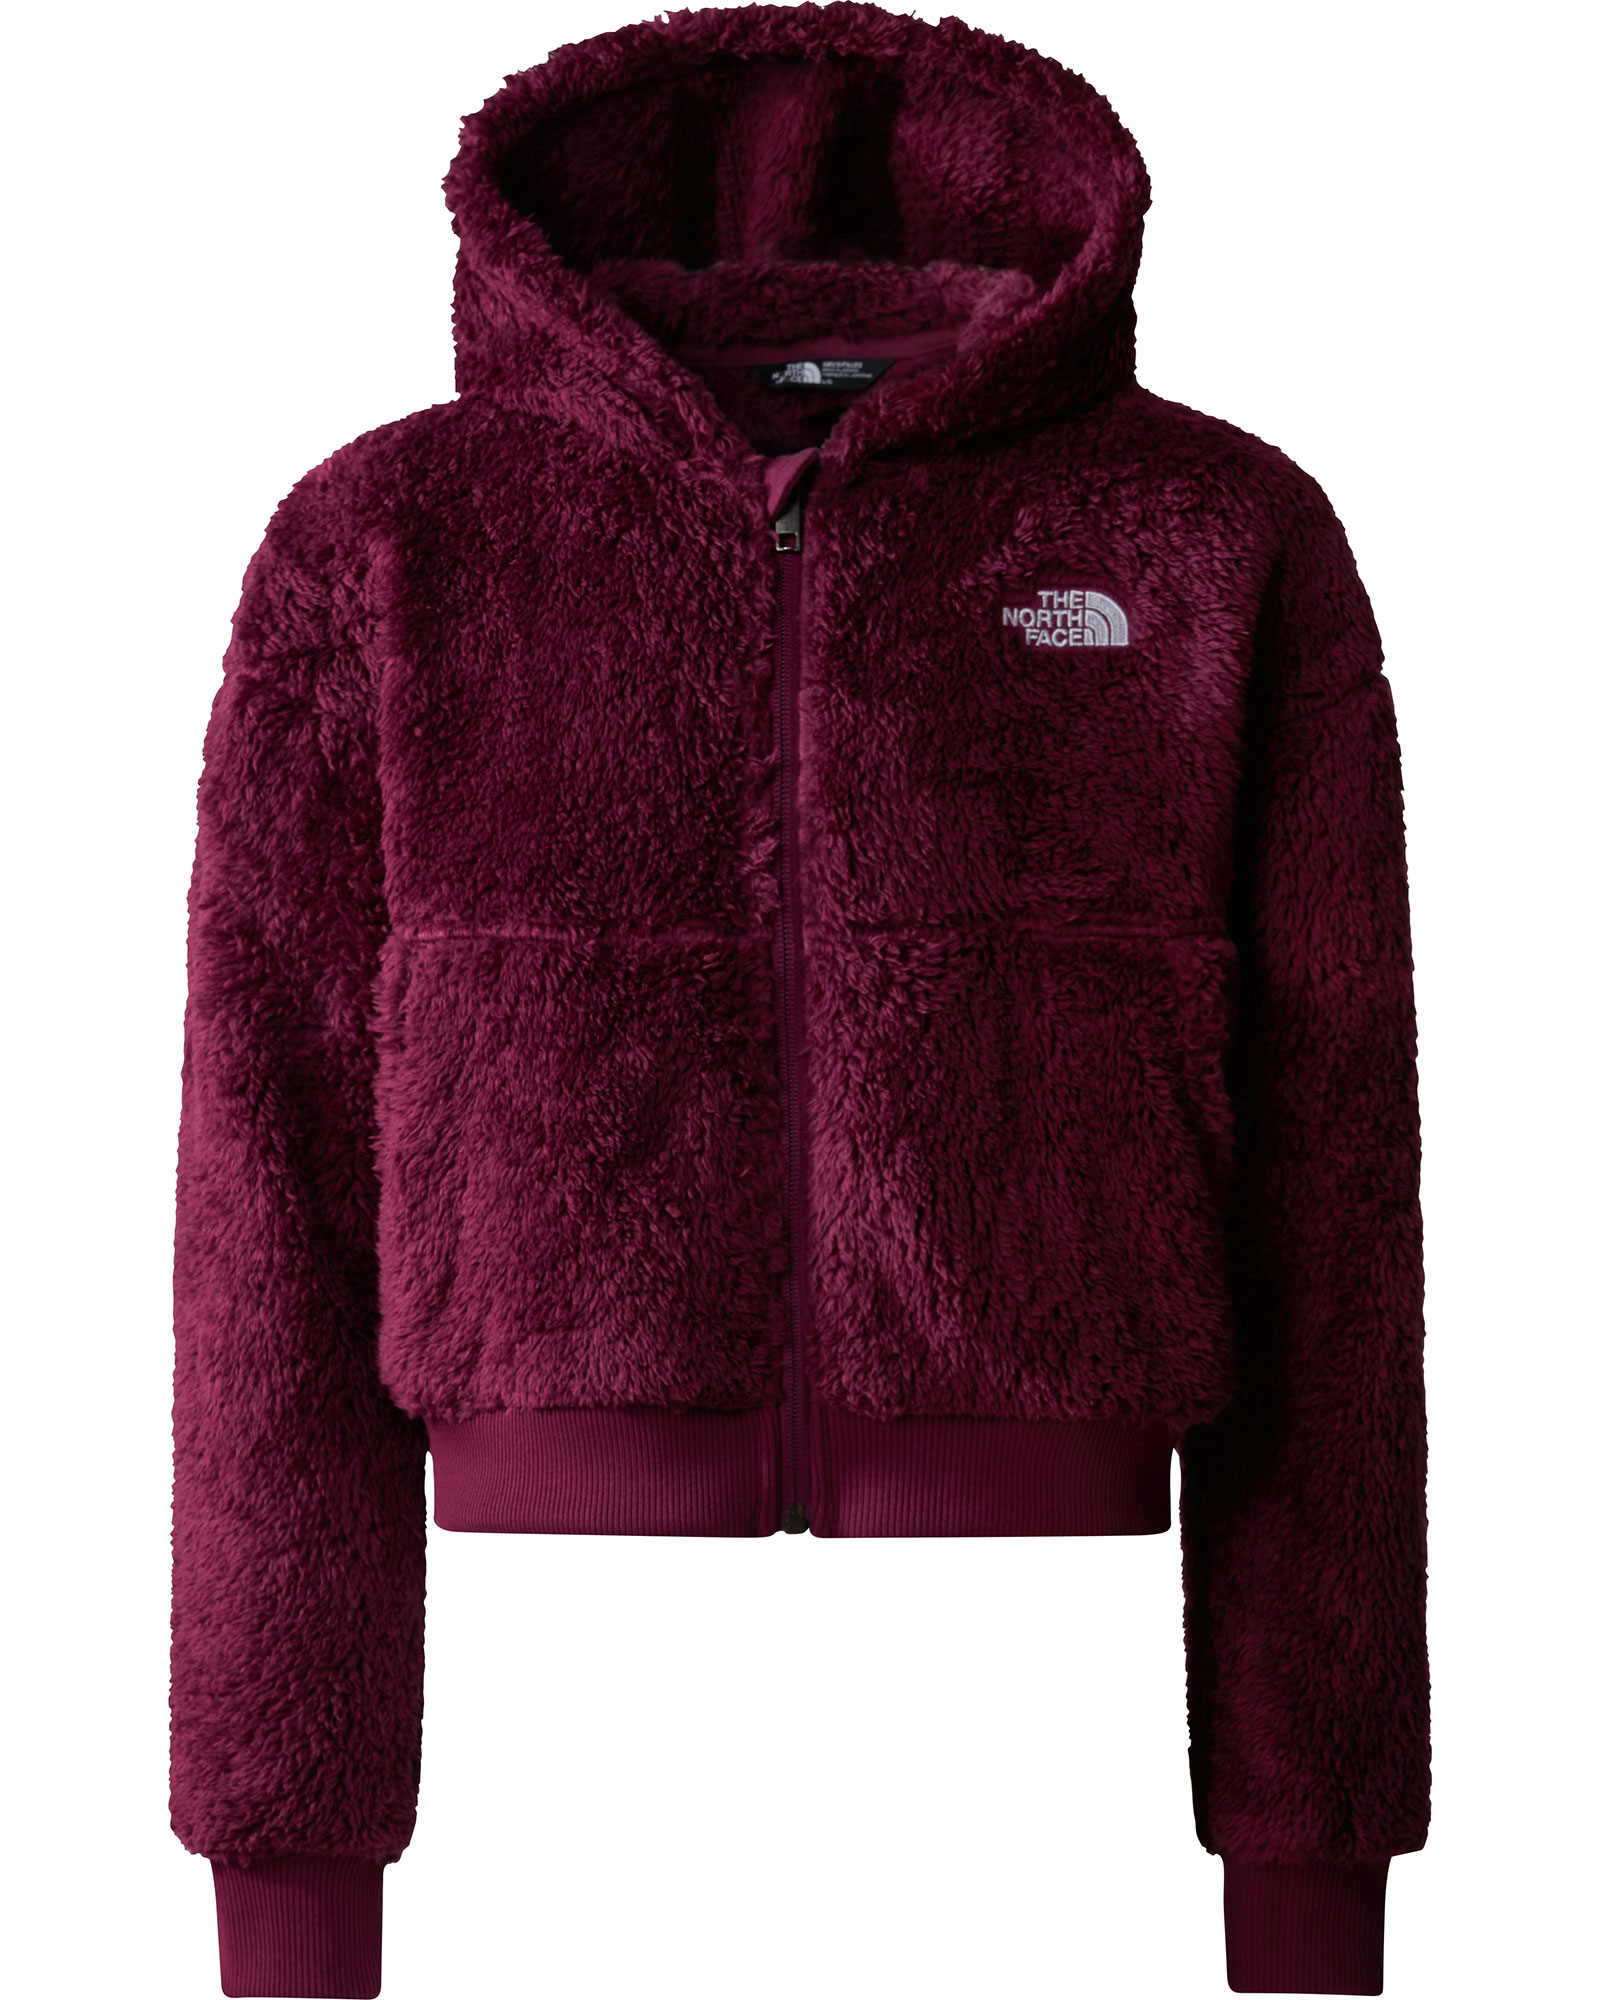 The North Face Girl’s Suave Oso FZ Hooded Jacket - Boysenberry XL